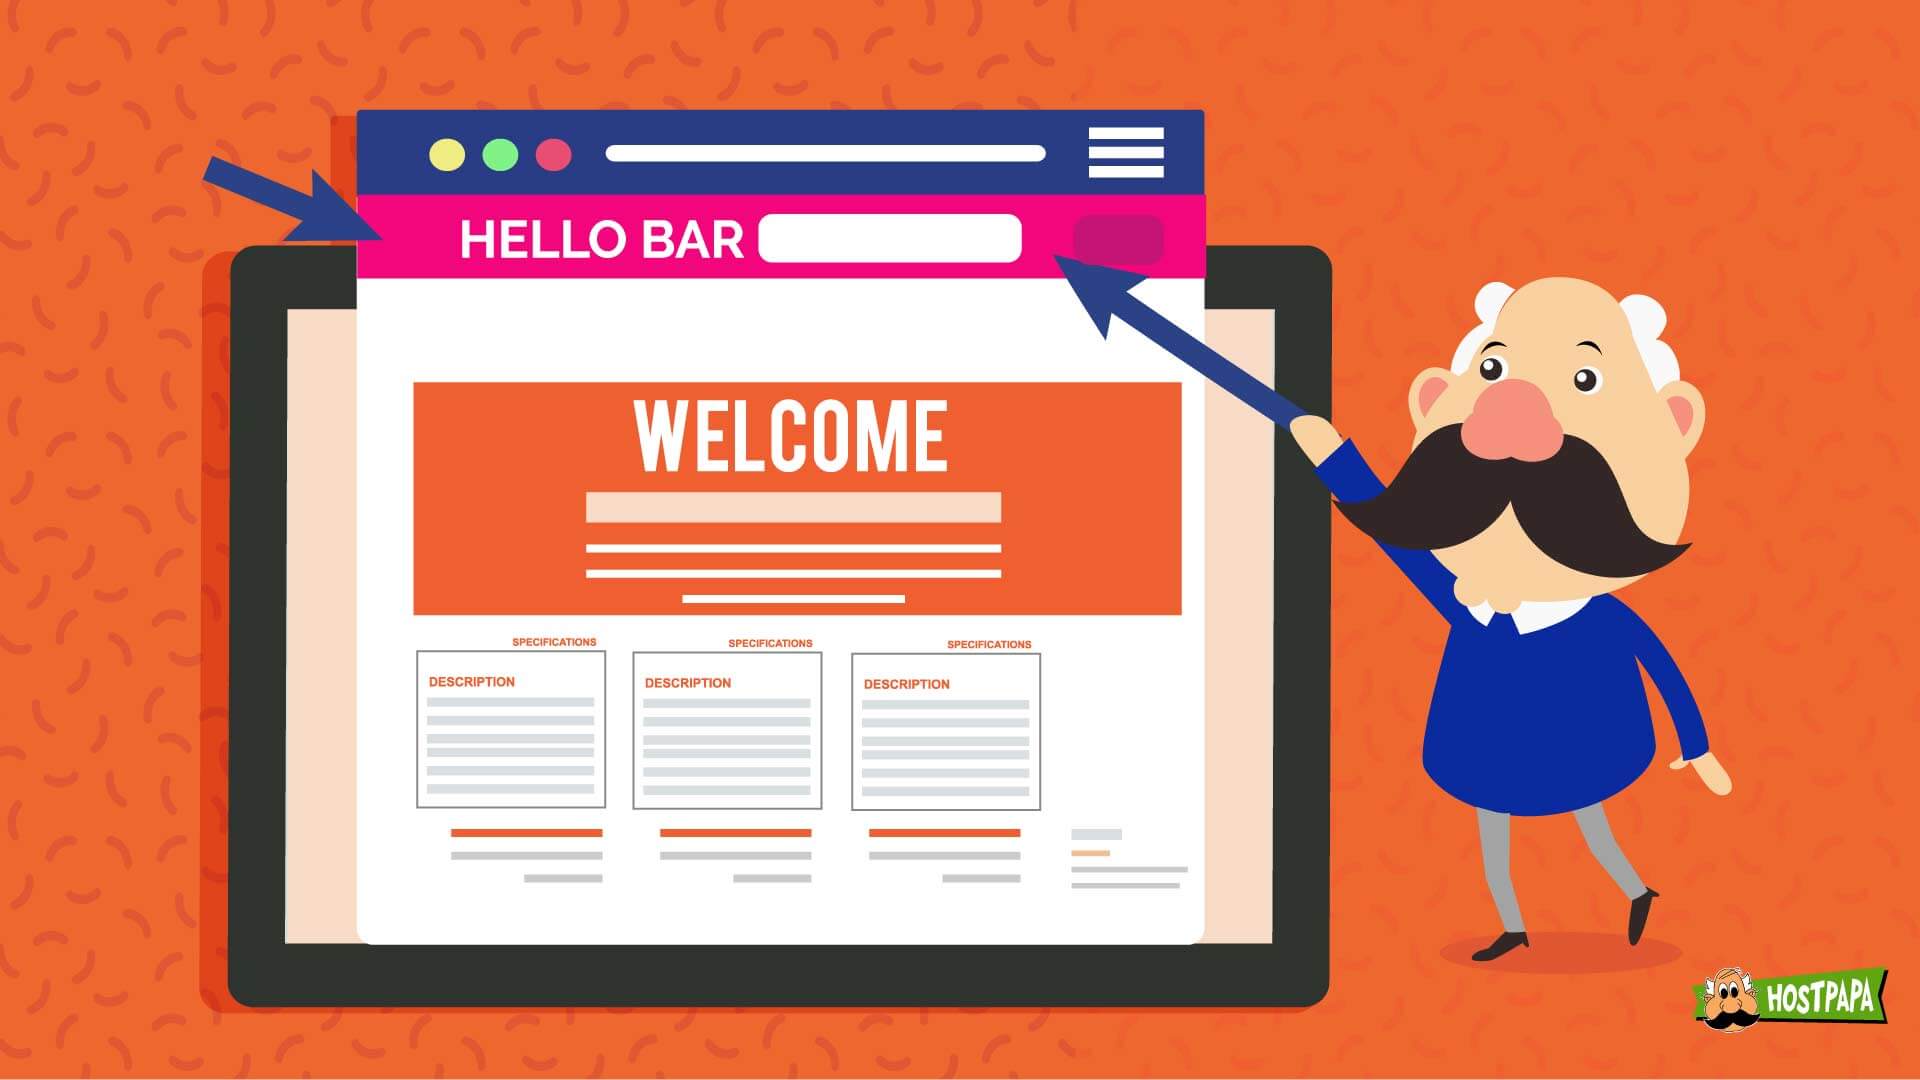 Hello Bar: An Alternative To Annoying Popups On Your Website